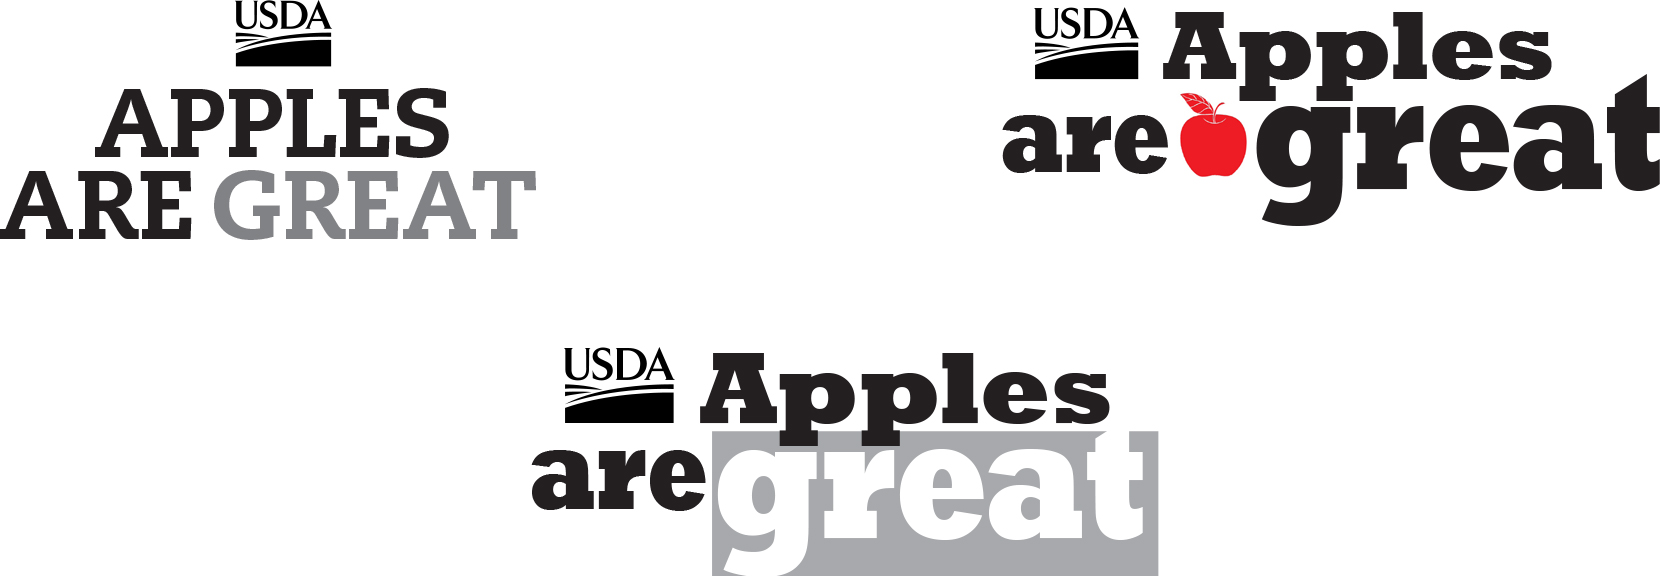 Acceptable variations of USDA theme art